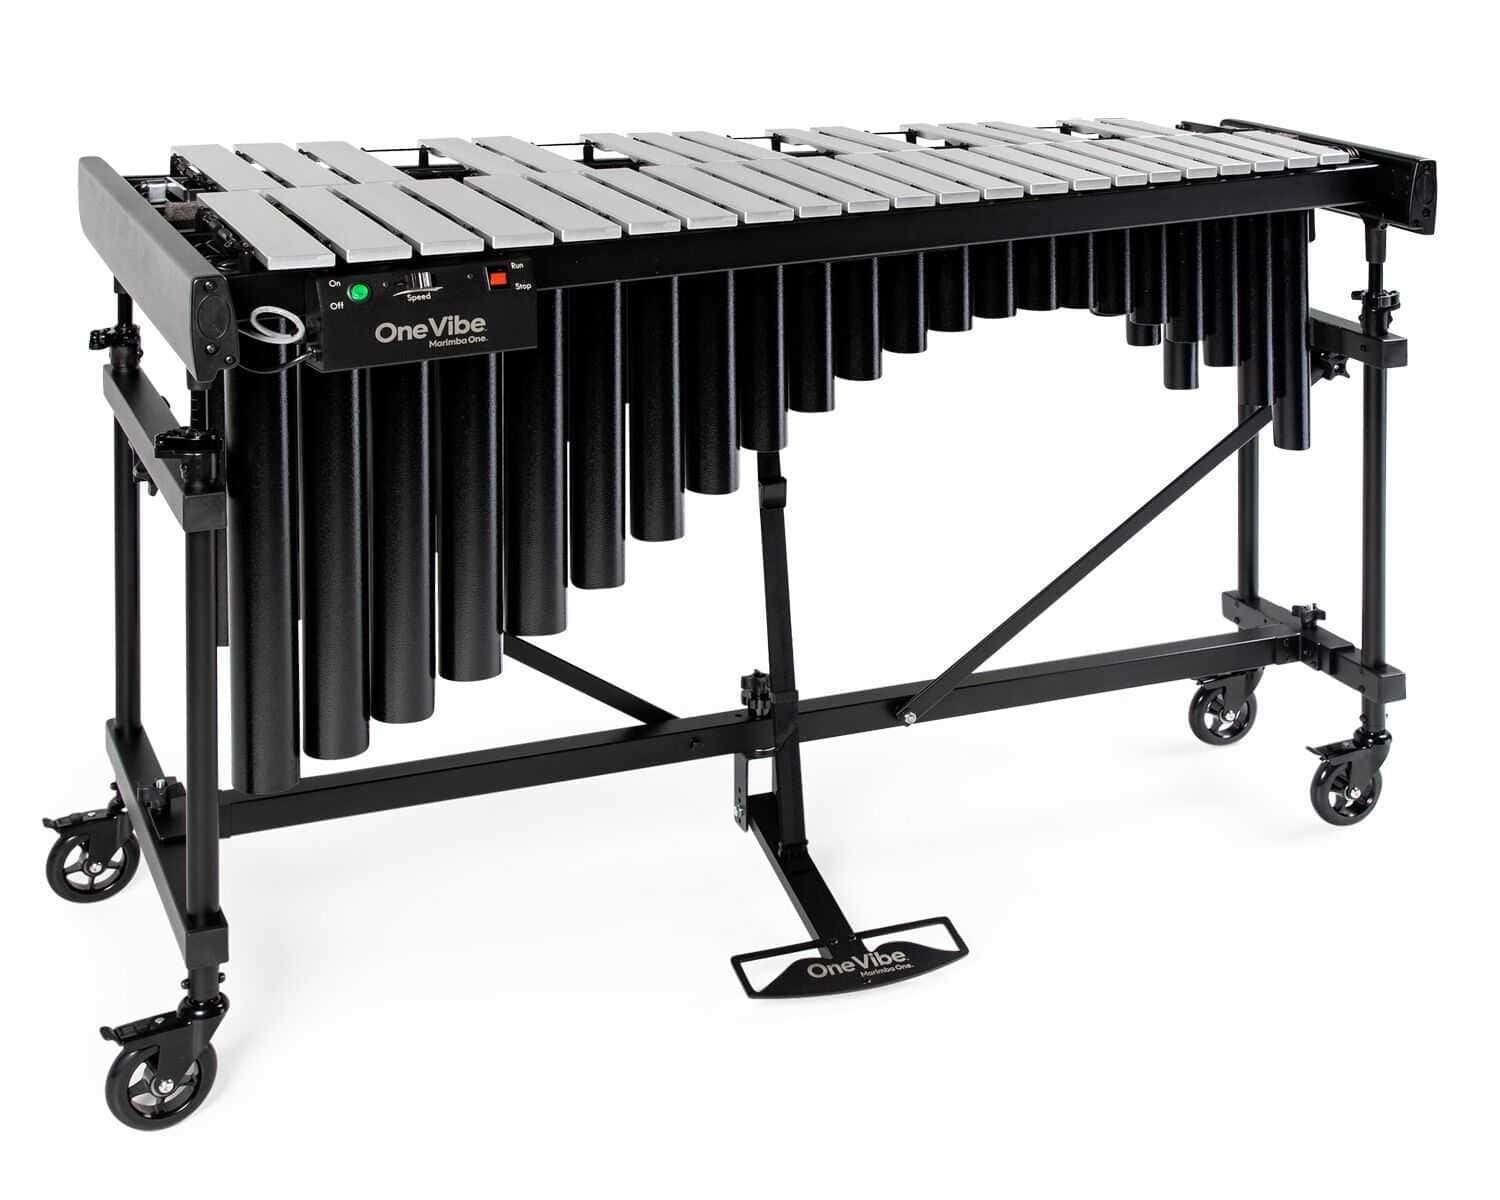 One Vibe: 3 oct Silver Bar Vibraphone (with motor)